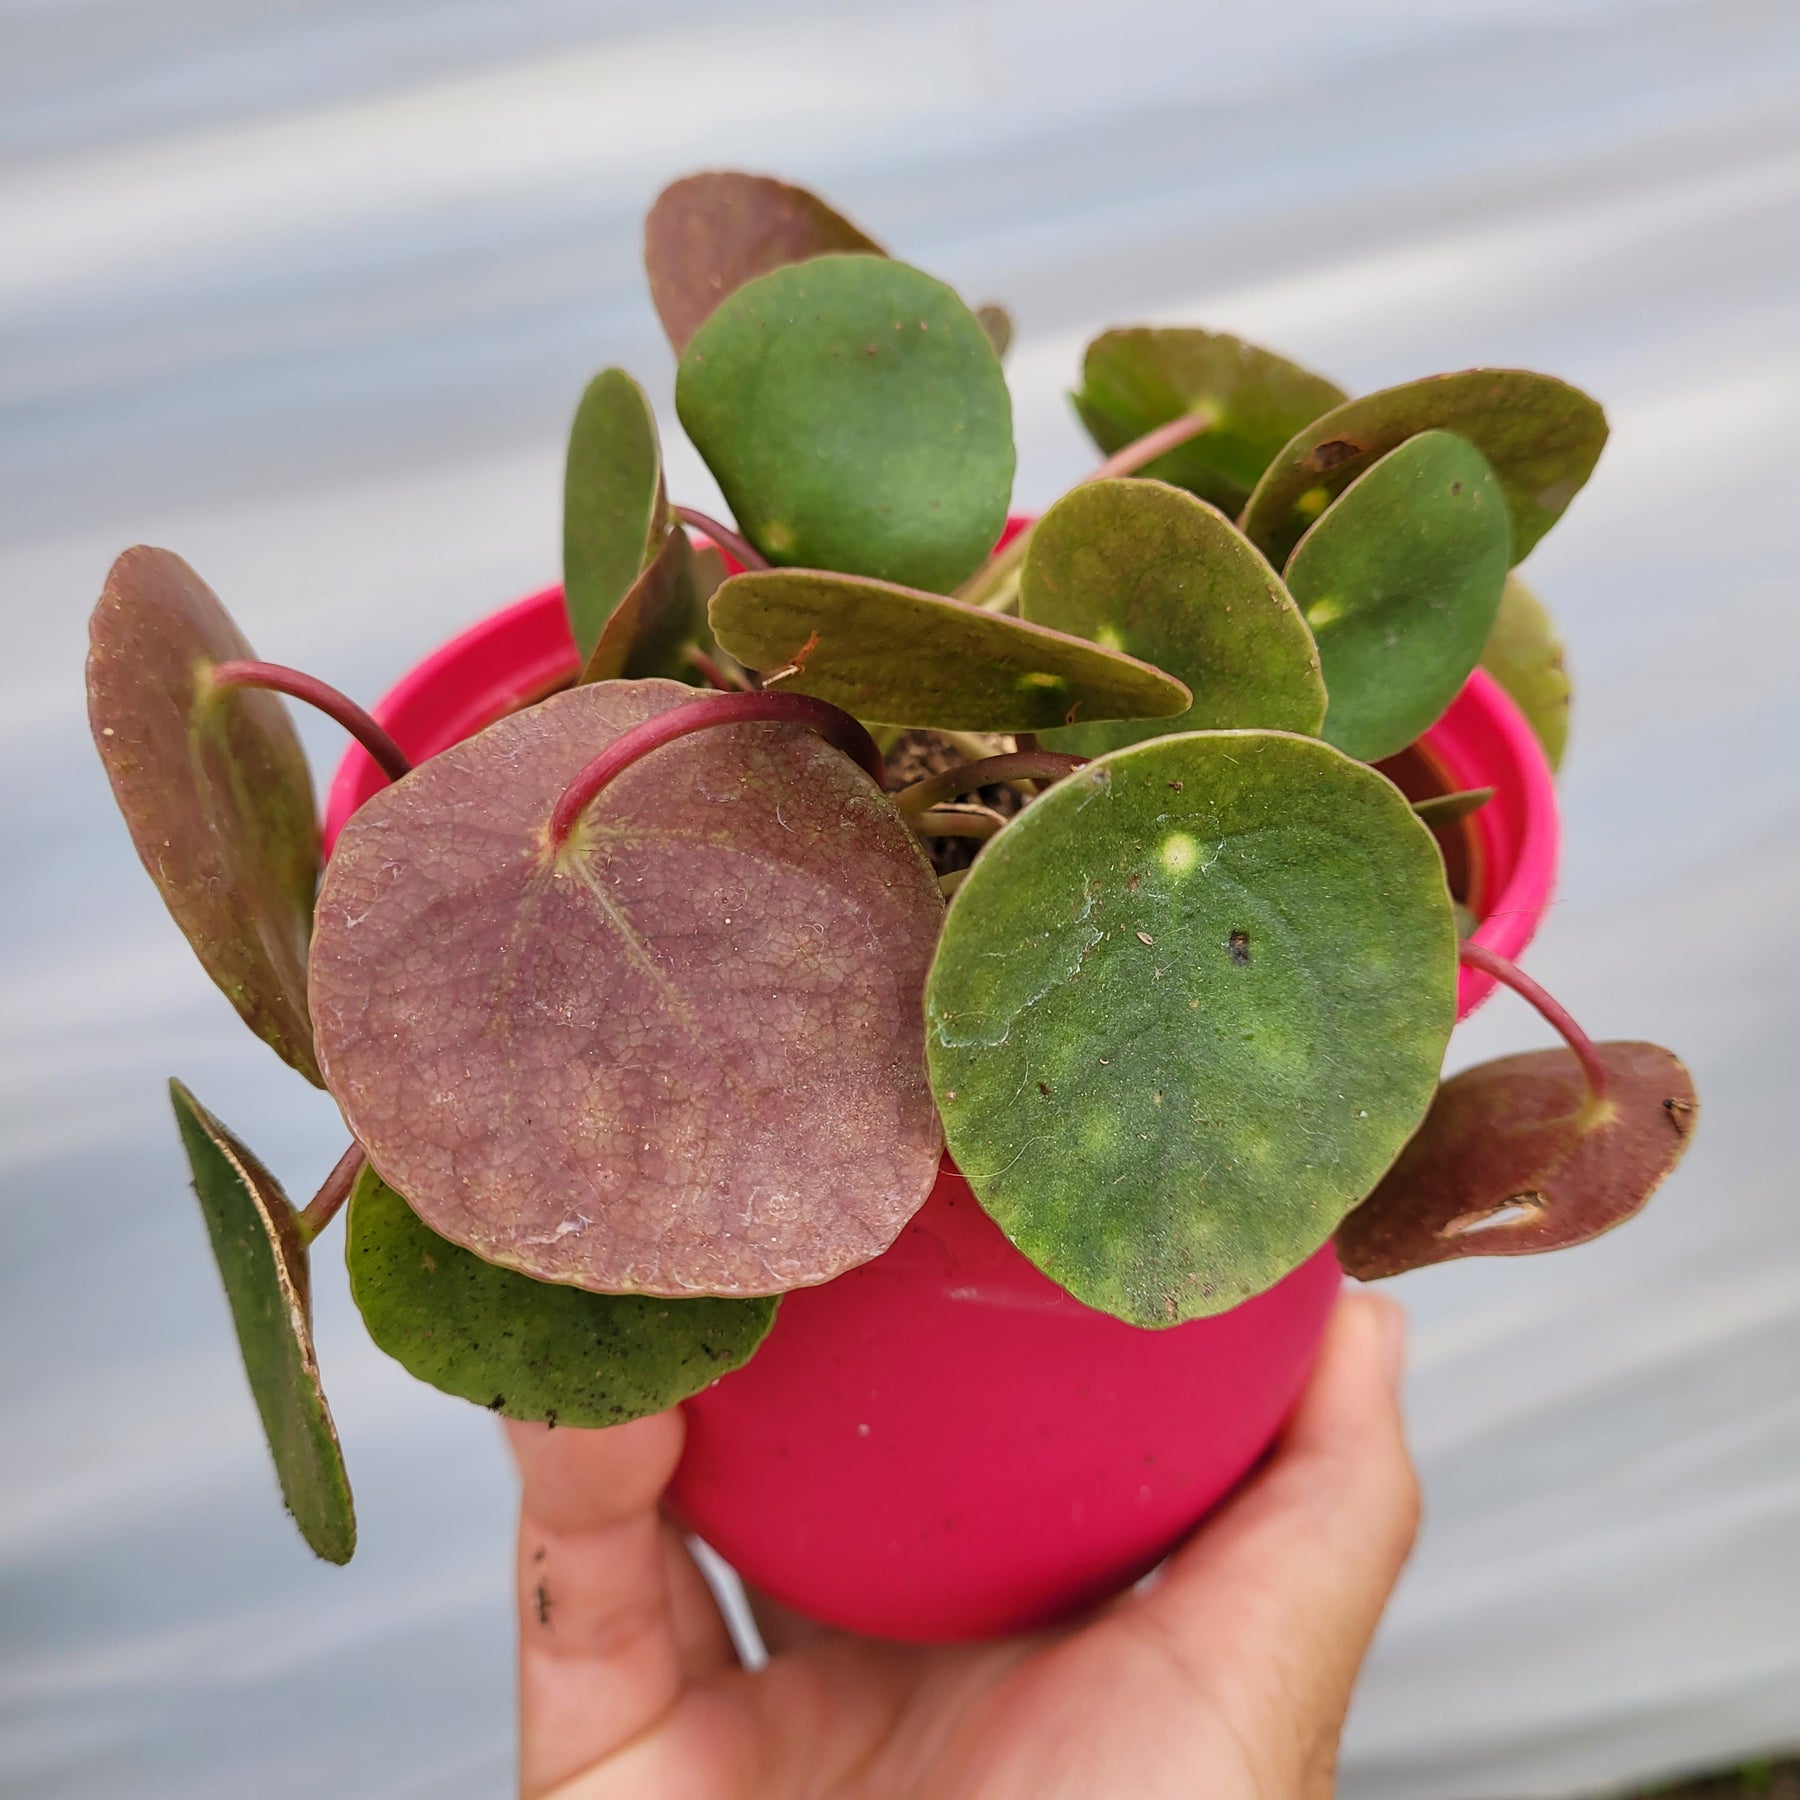 Pilea peperomioides 'Chinese money plant'